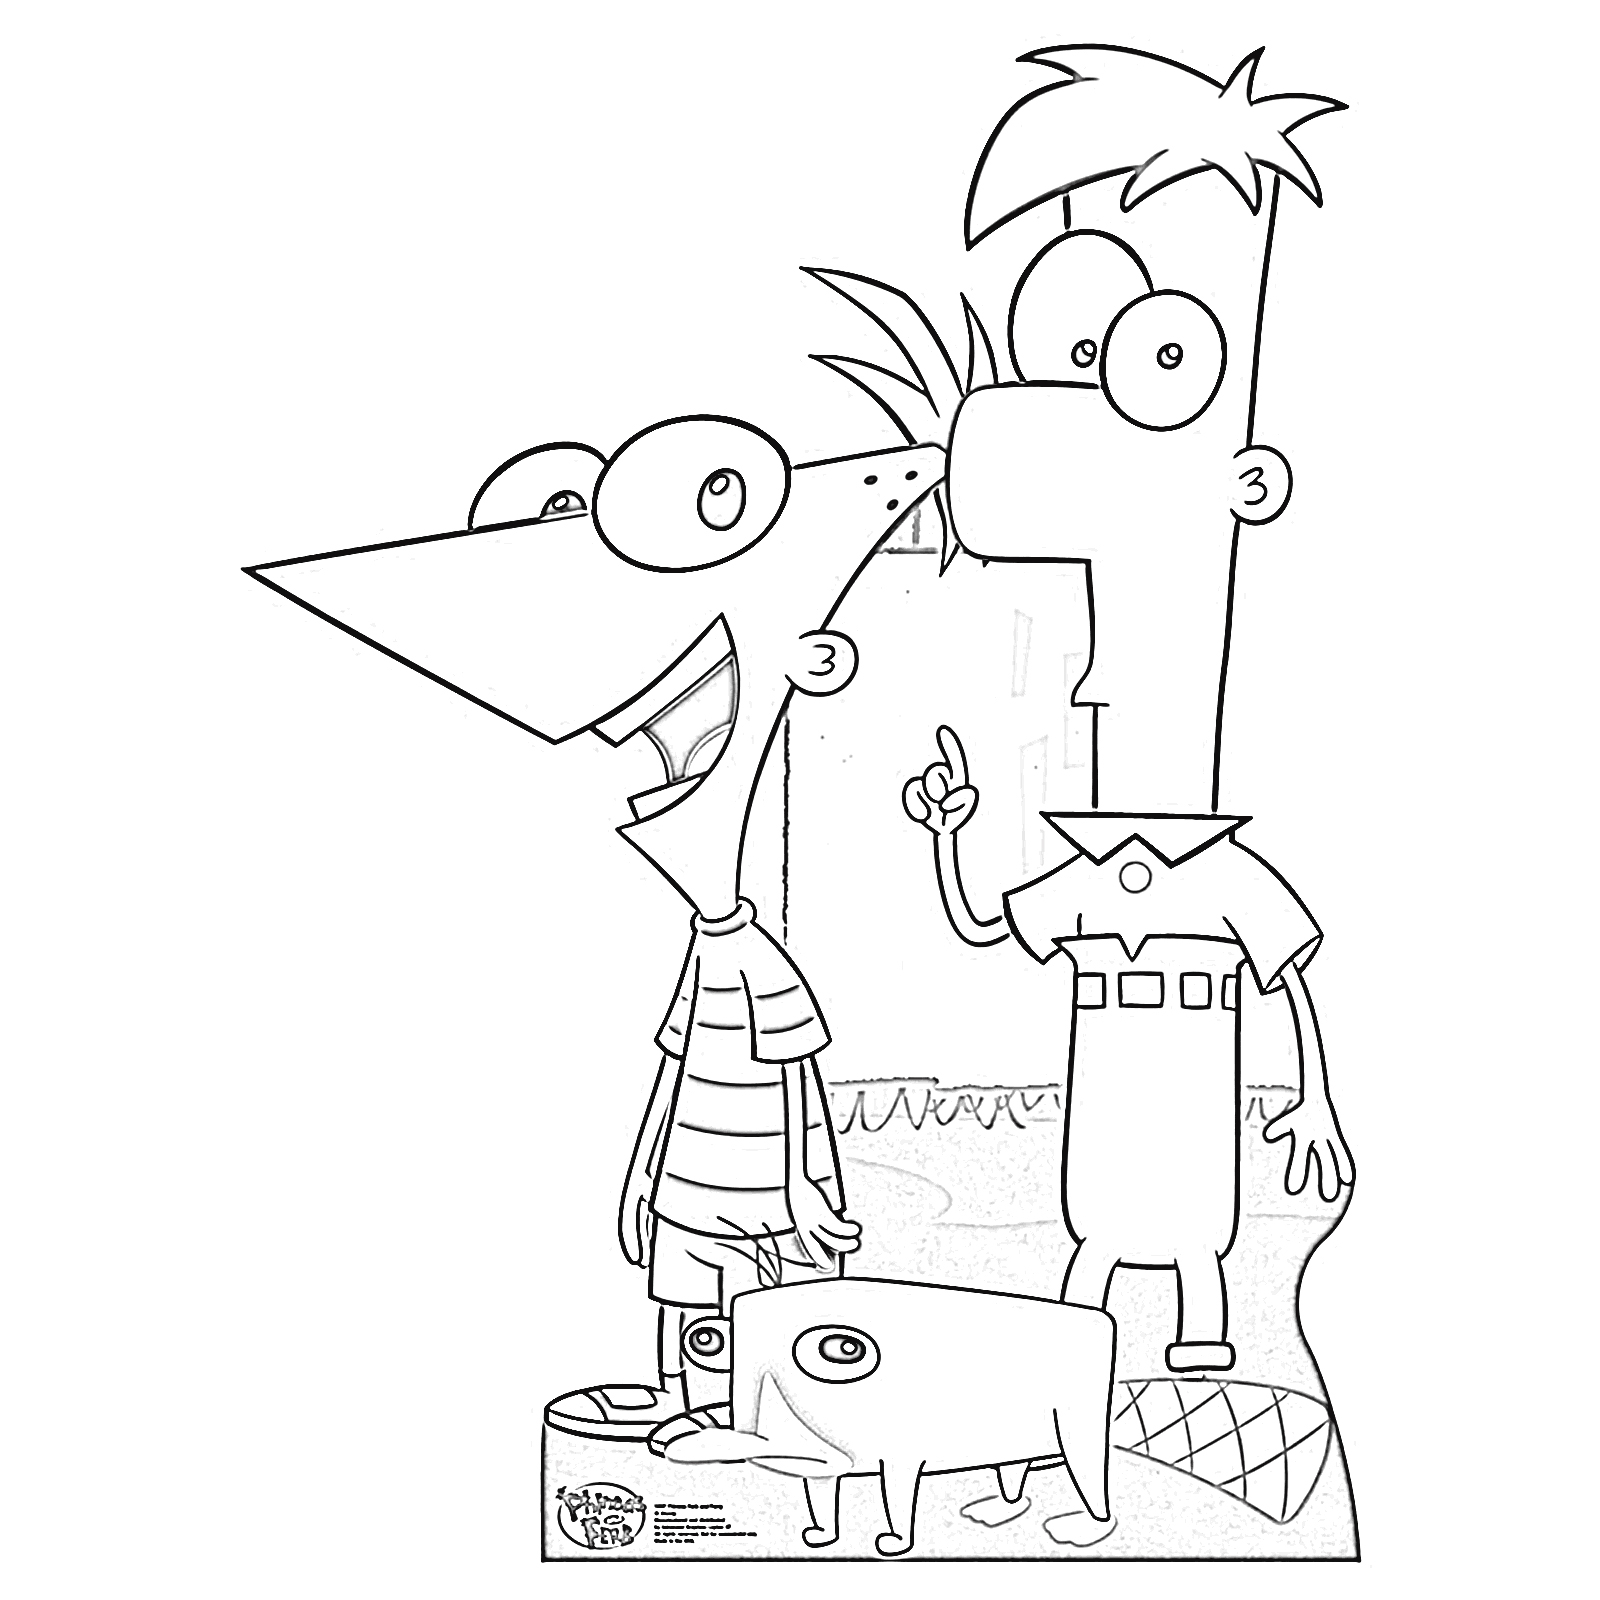 Phineas and Ferb Coloring Pages 1